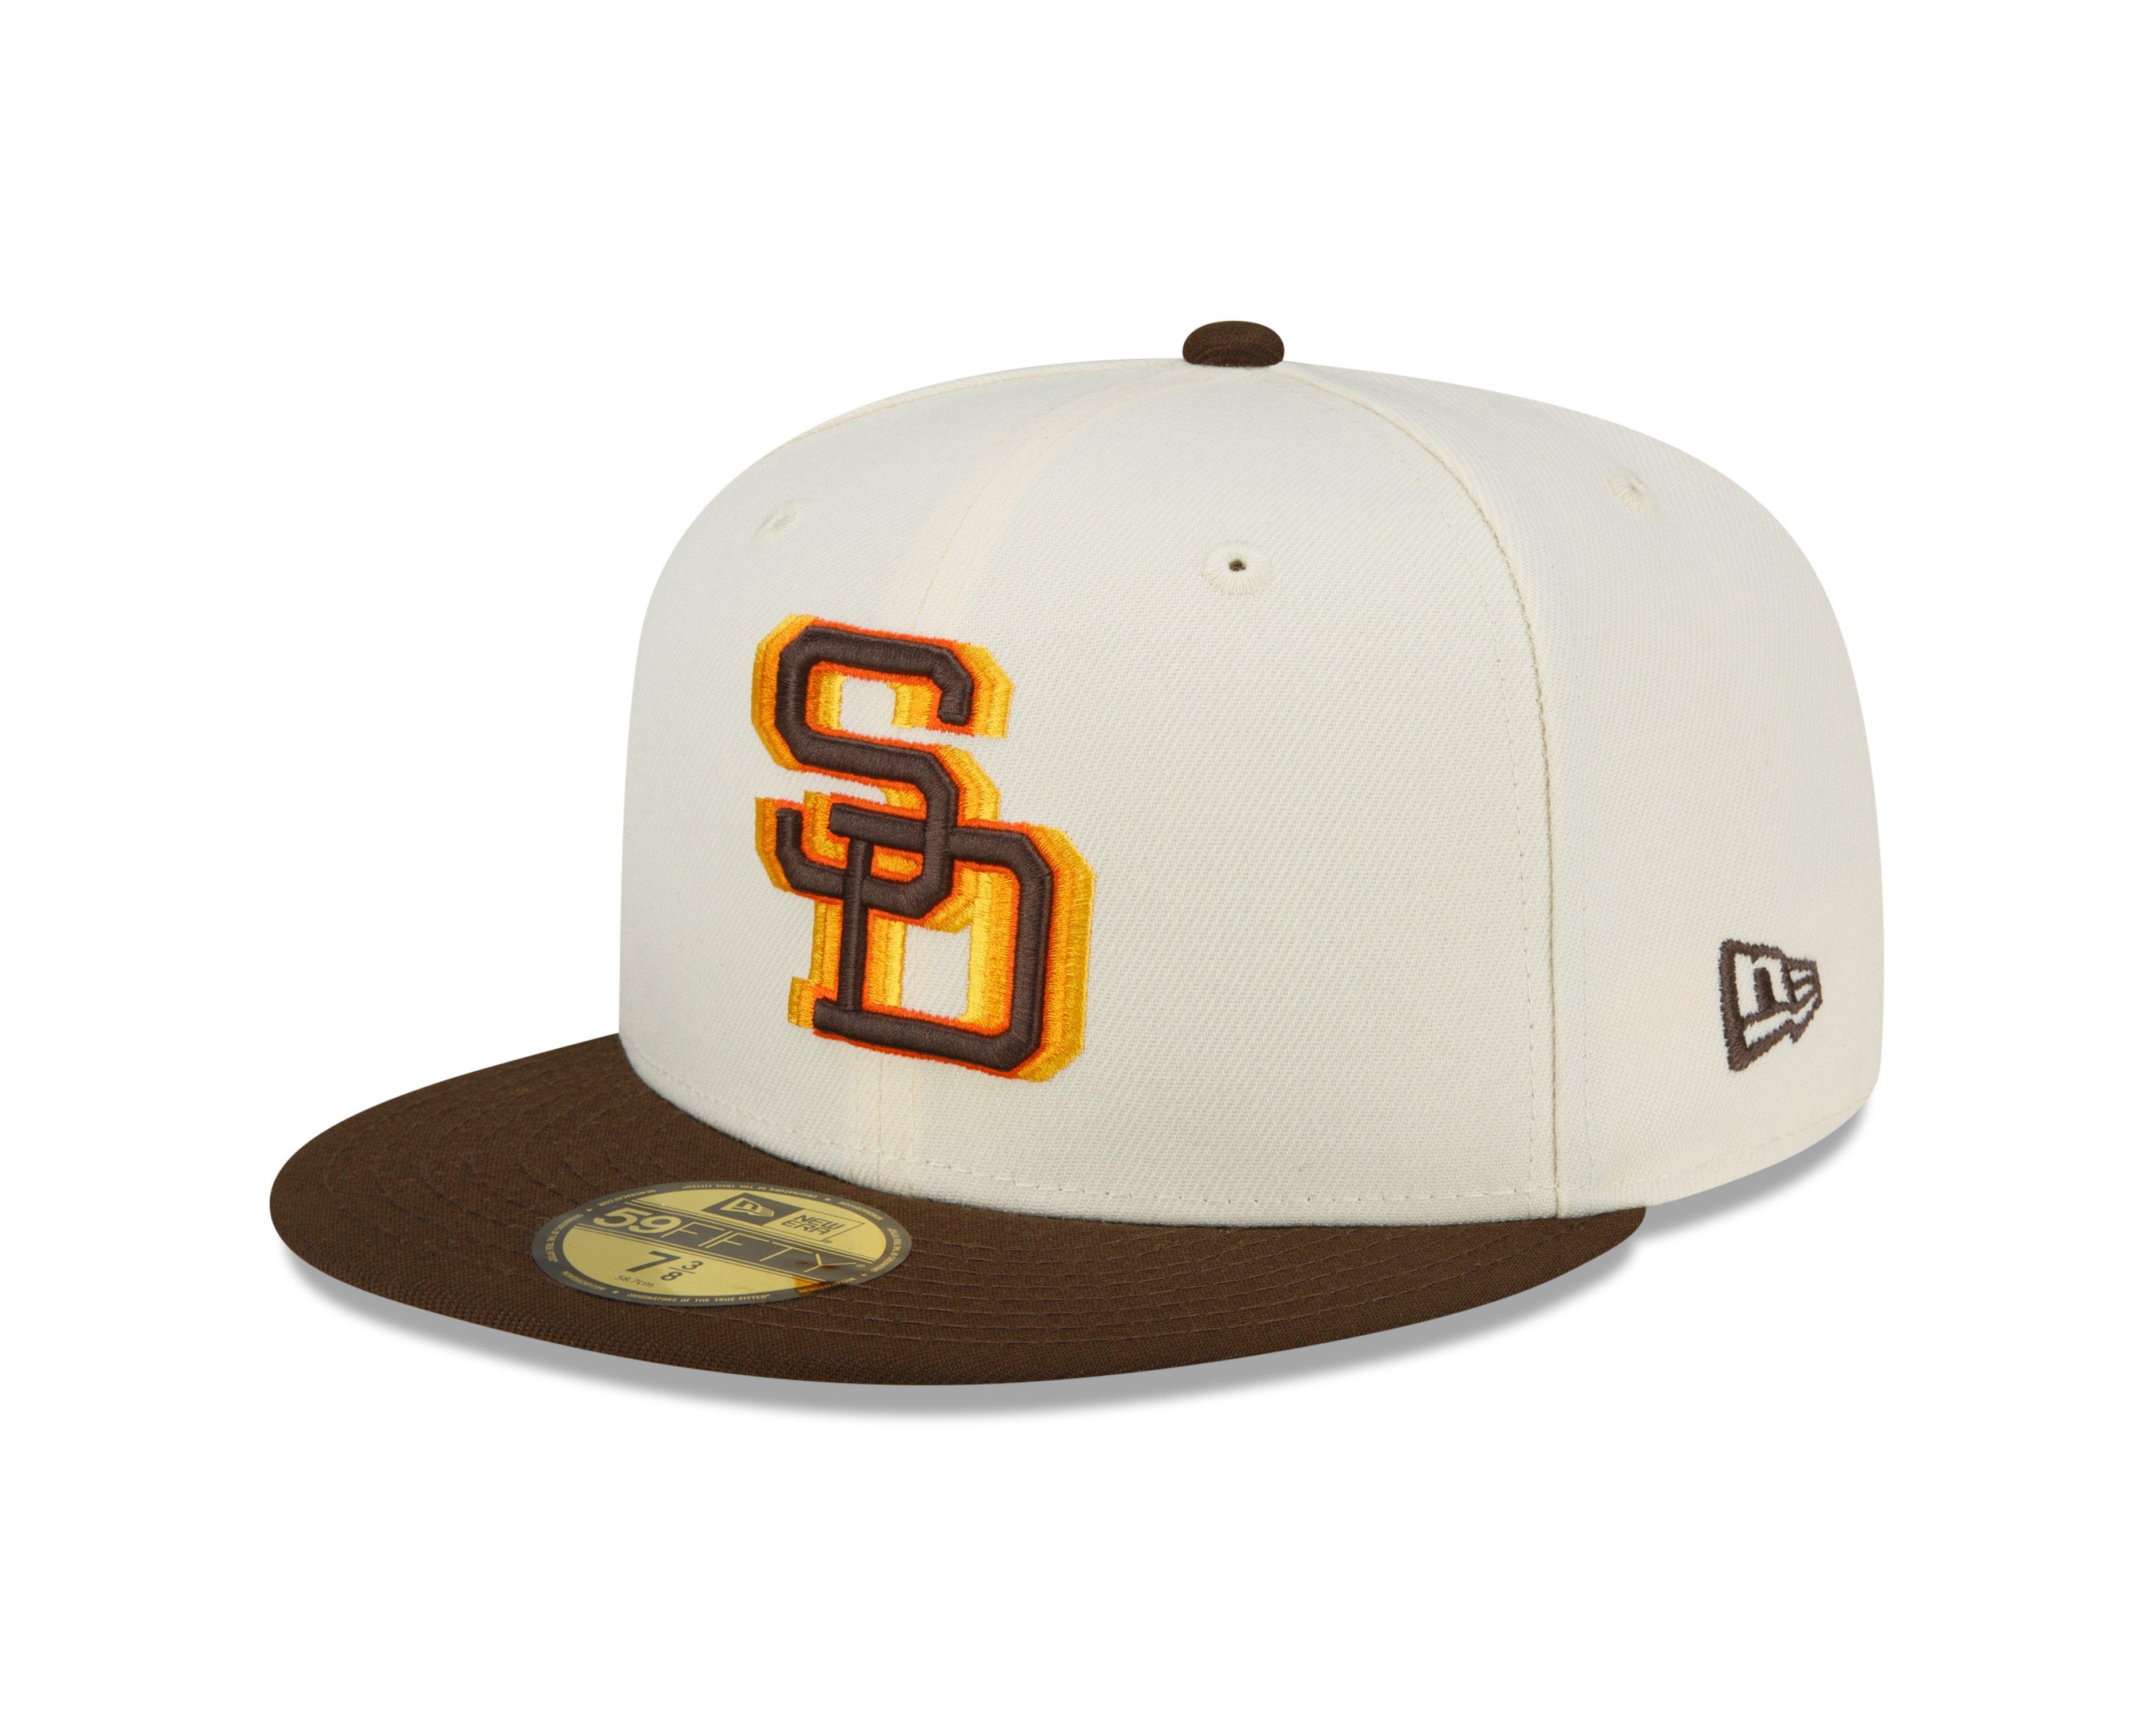 The Padres are bringing back the brown uniforms, so let's all cheer